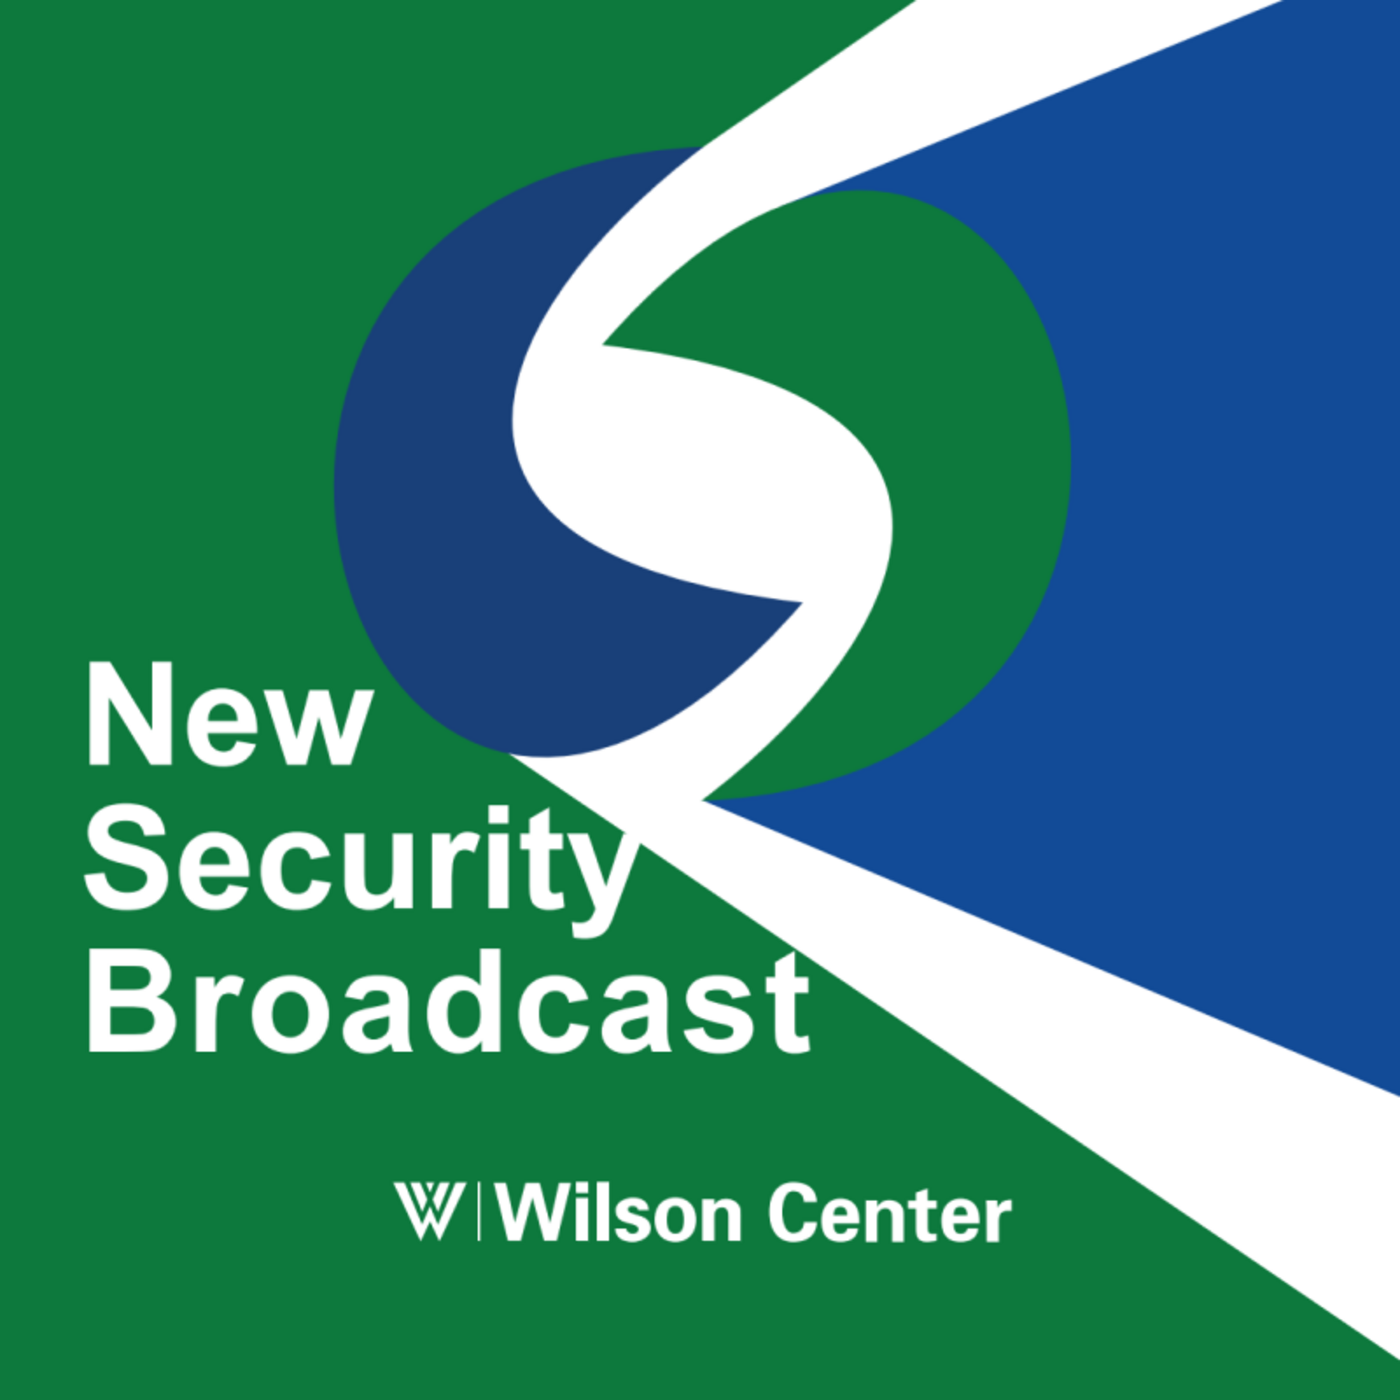 Episode 249: Introducing New Security Broadcast